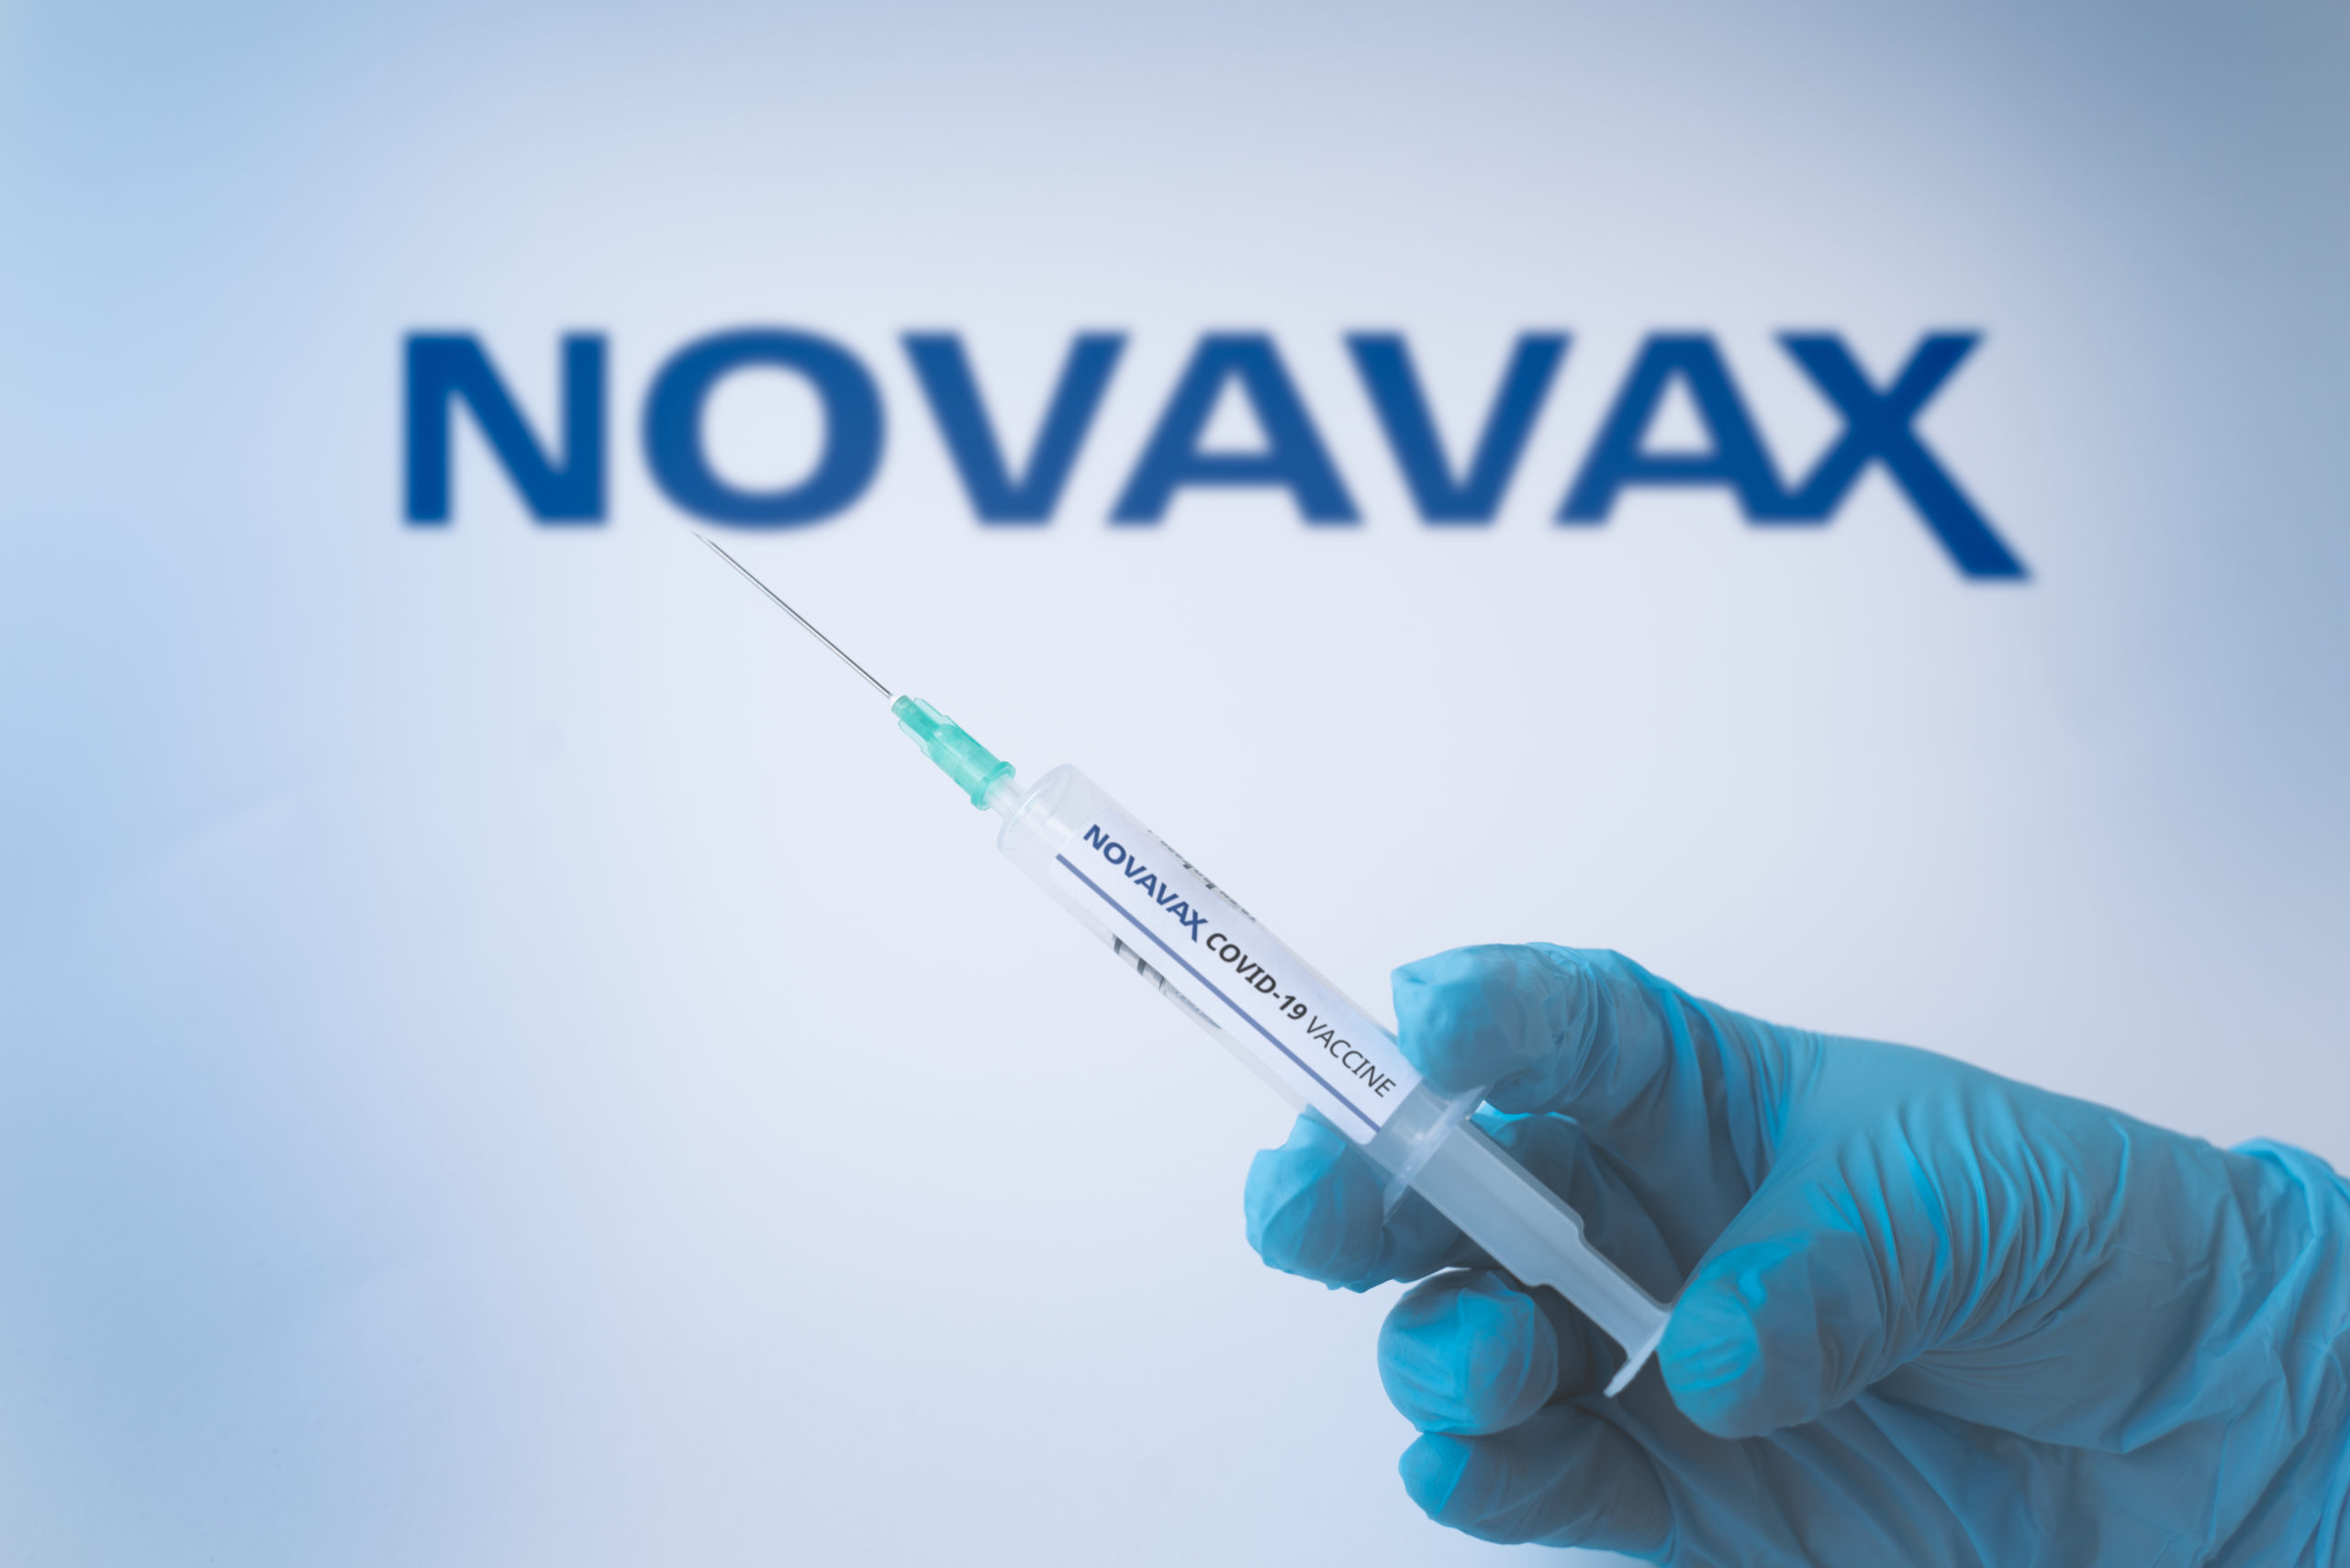 Federal Government signs deals with Novavax to make Covid-19 vaccines in Canada